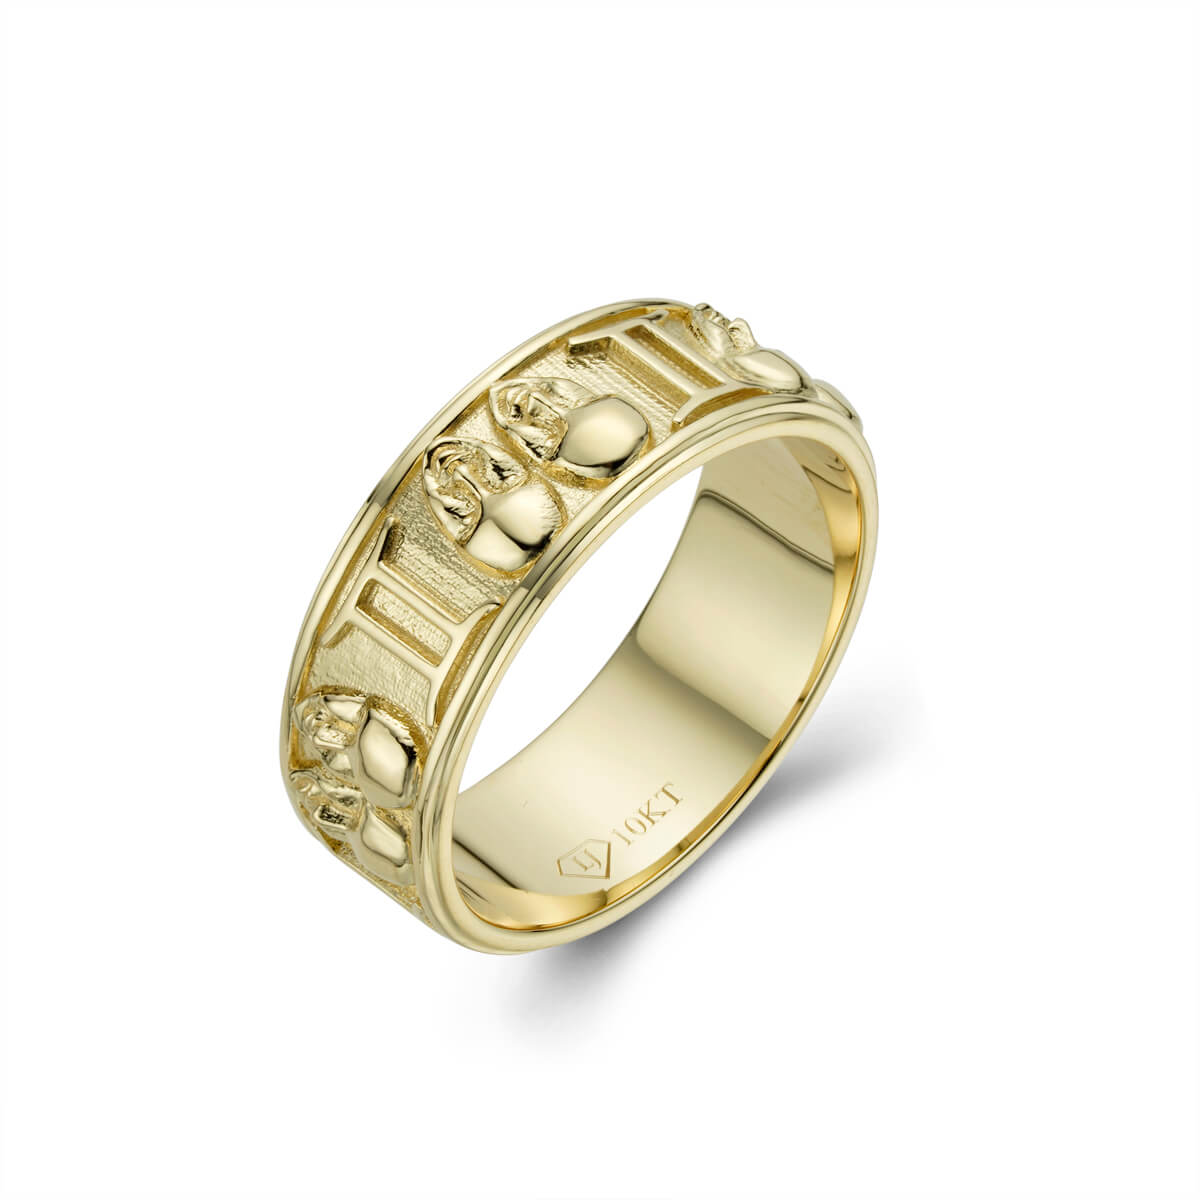 It Is Lucky For These 4 Zodiac Signs To Wear A Gold Ring – Bejan Daruwalla